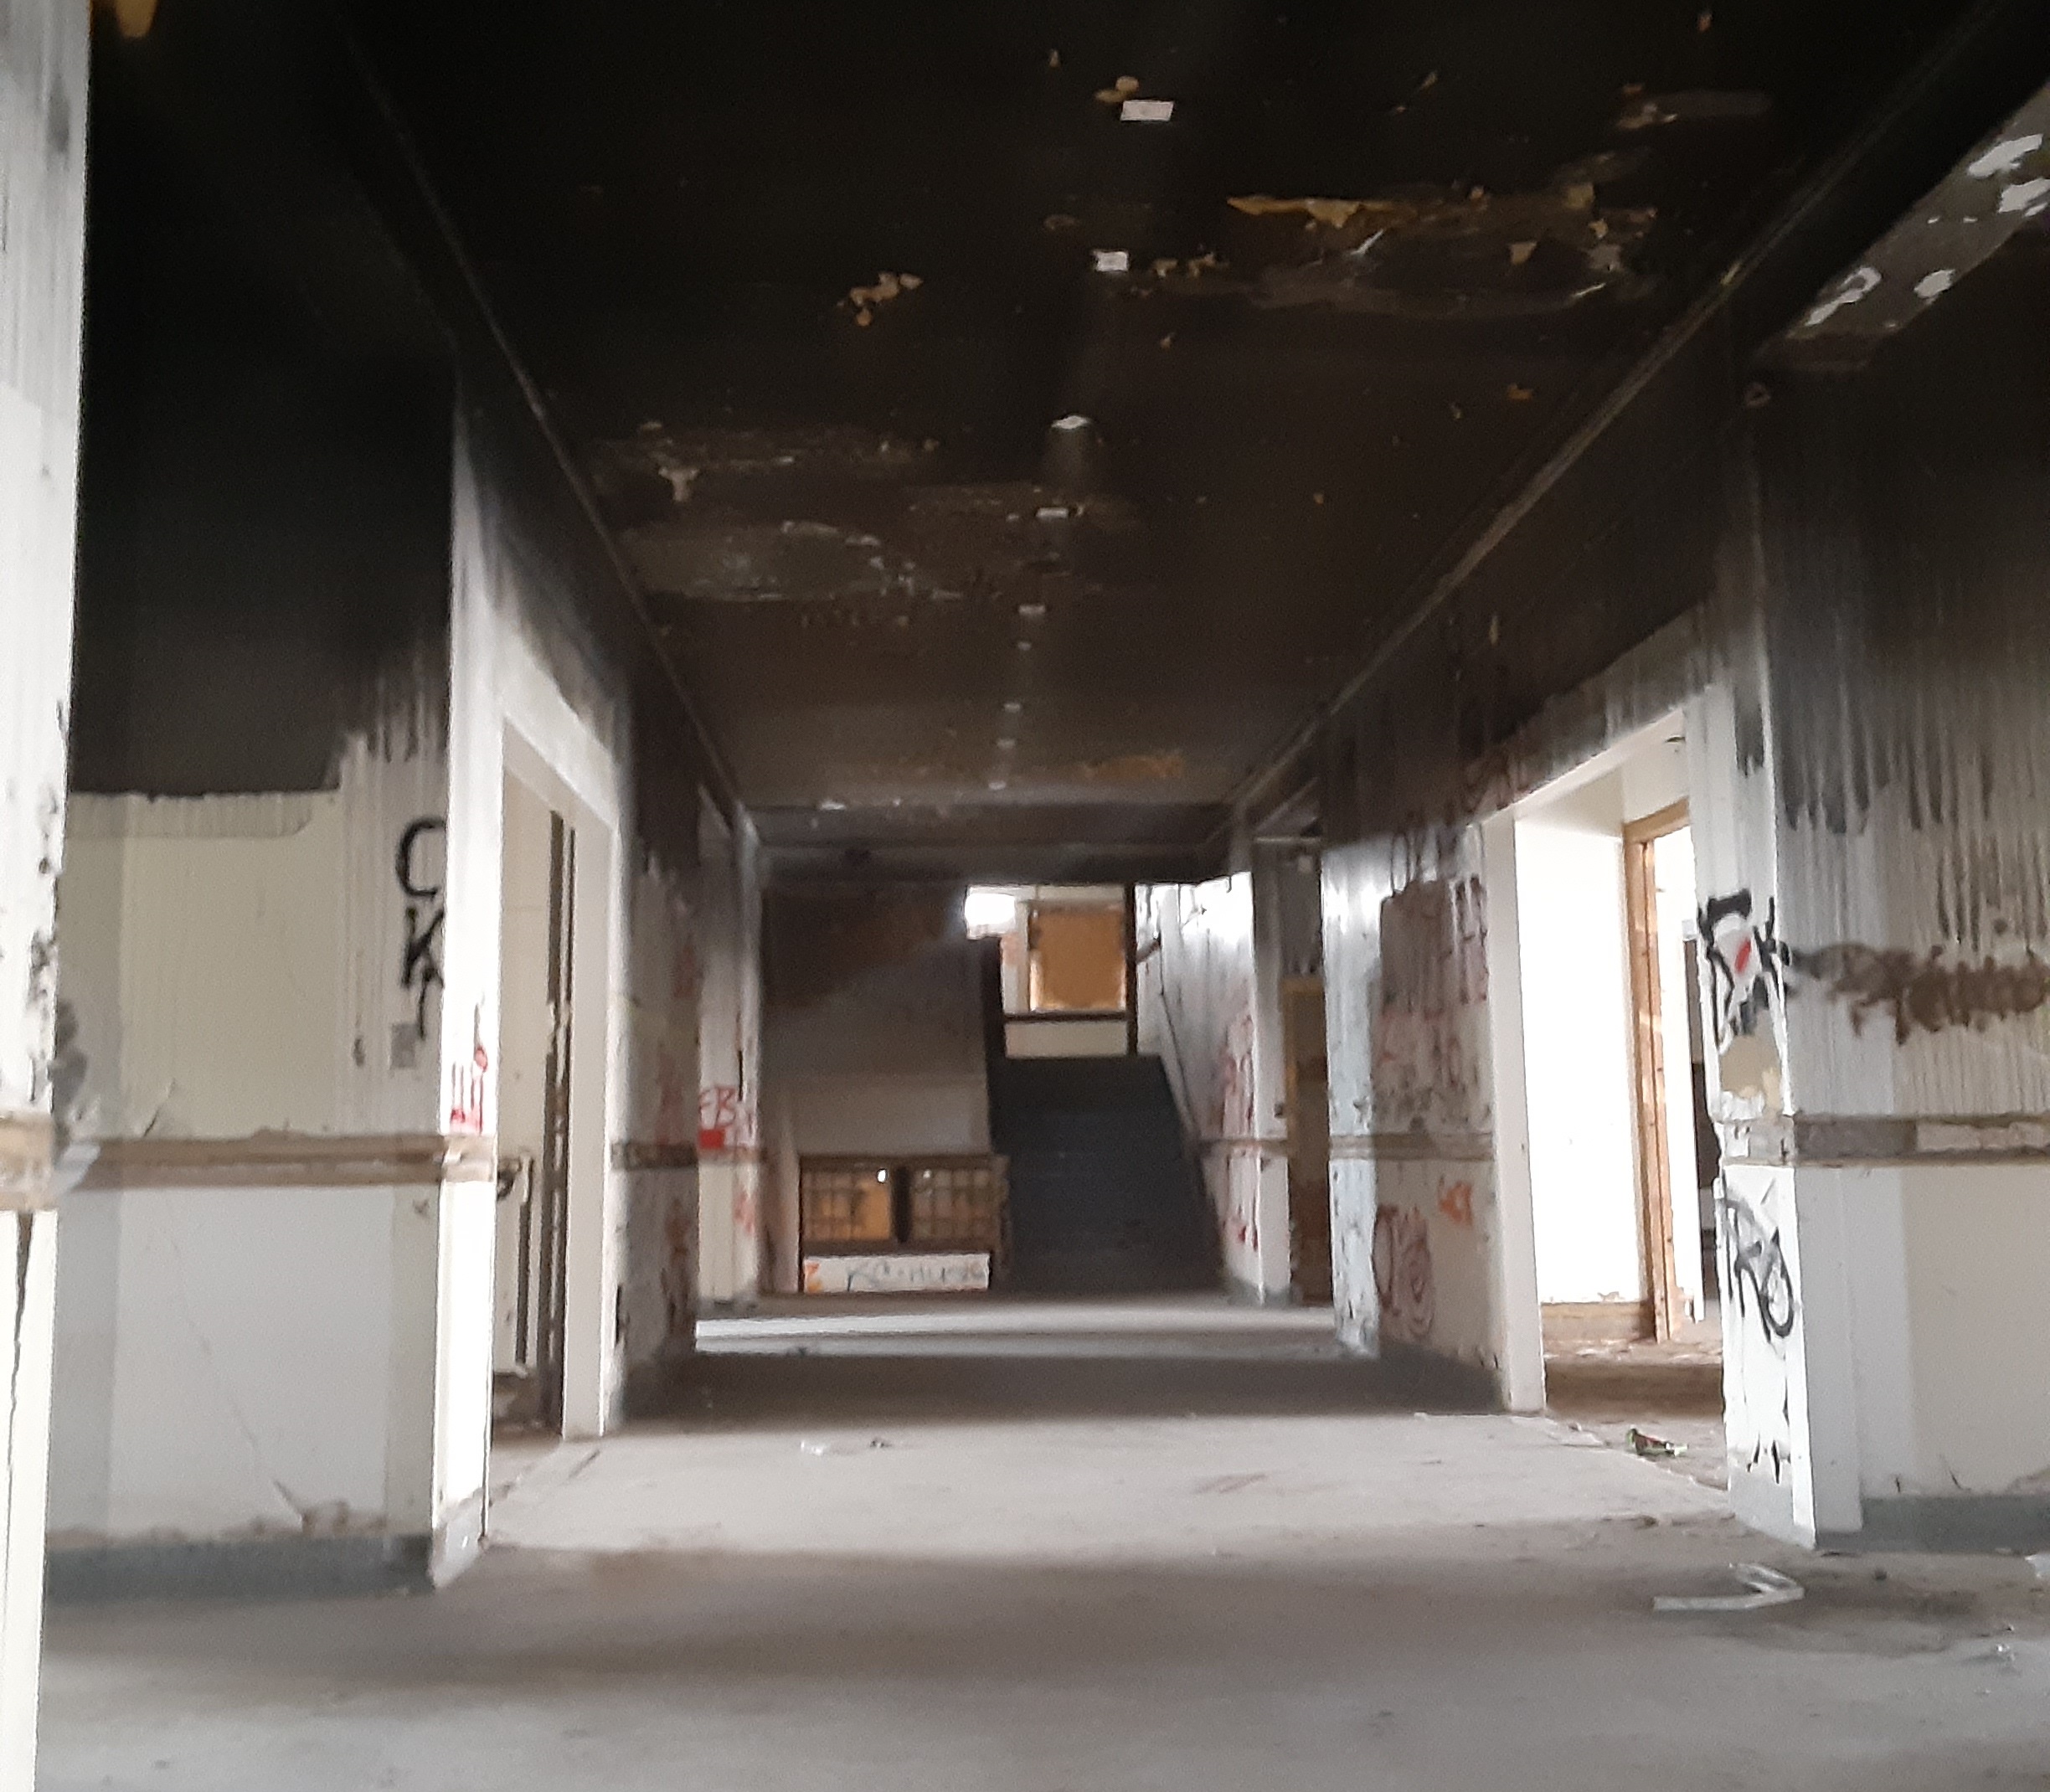 Photo of the 1st floor hallway. There is graffiti visible on a few walls and smoke damage on the ceiling.